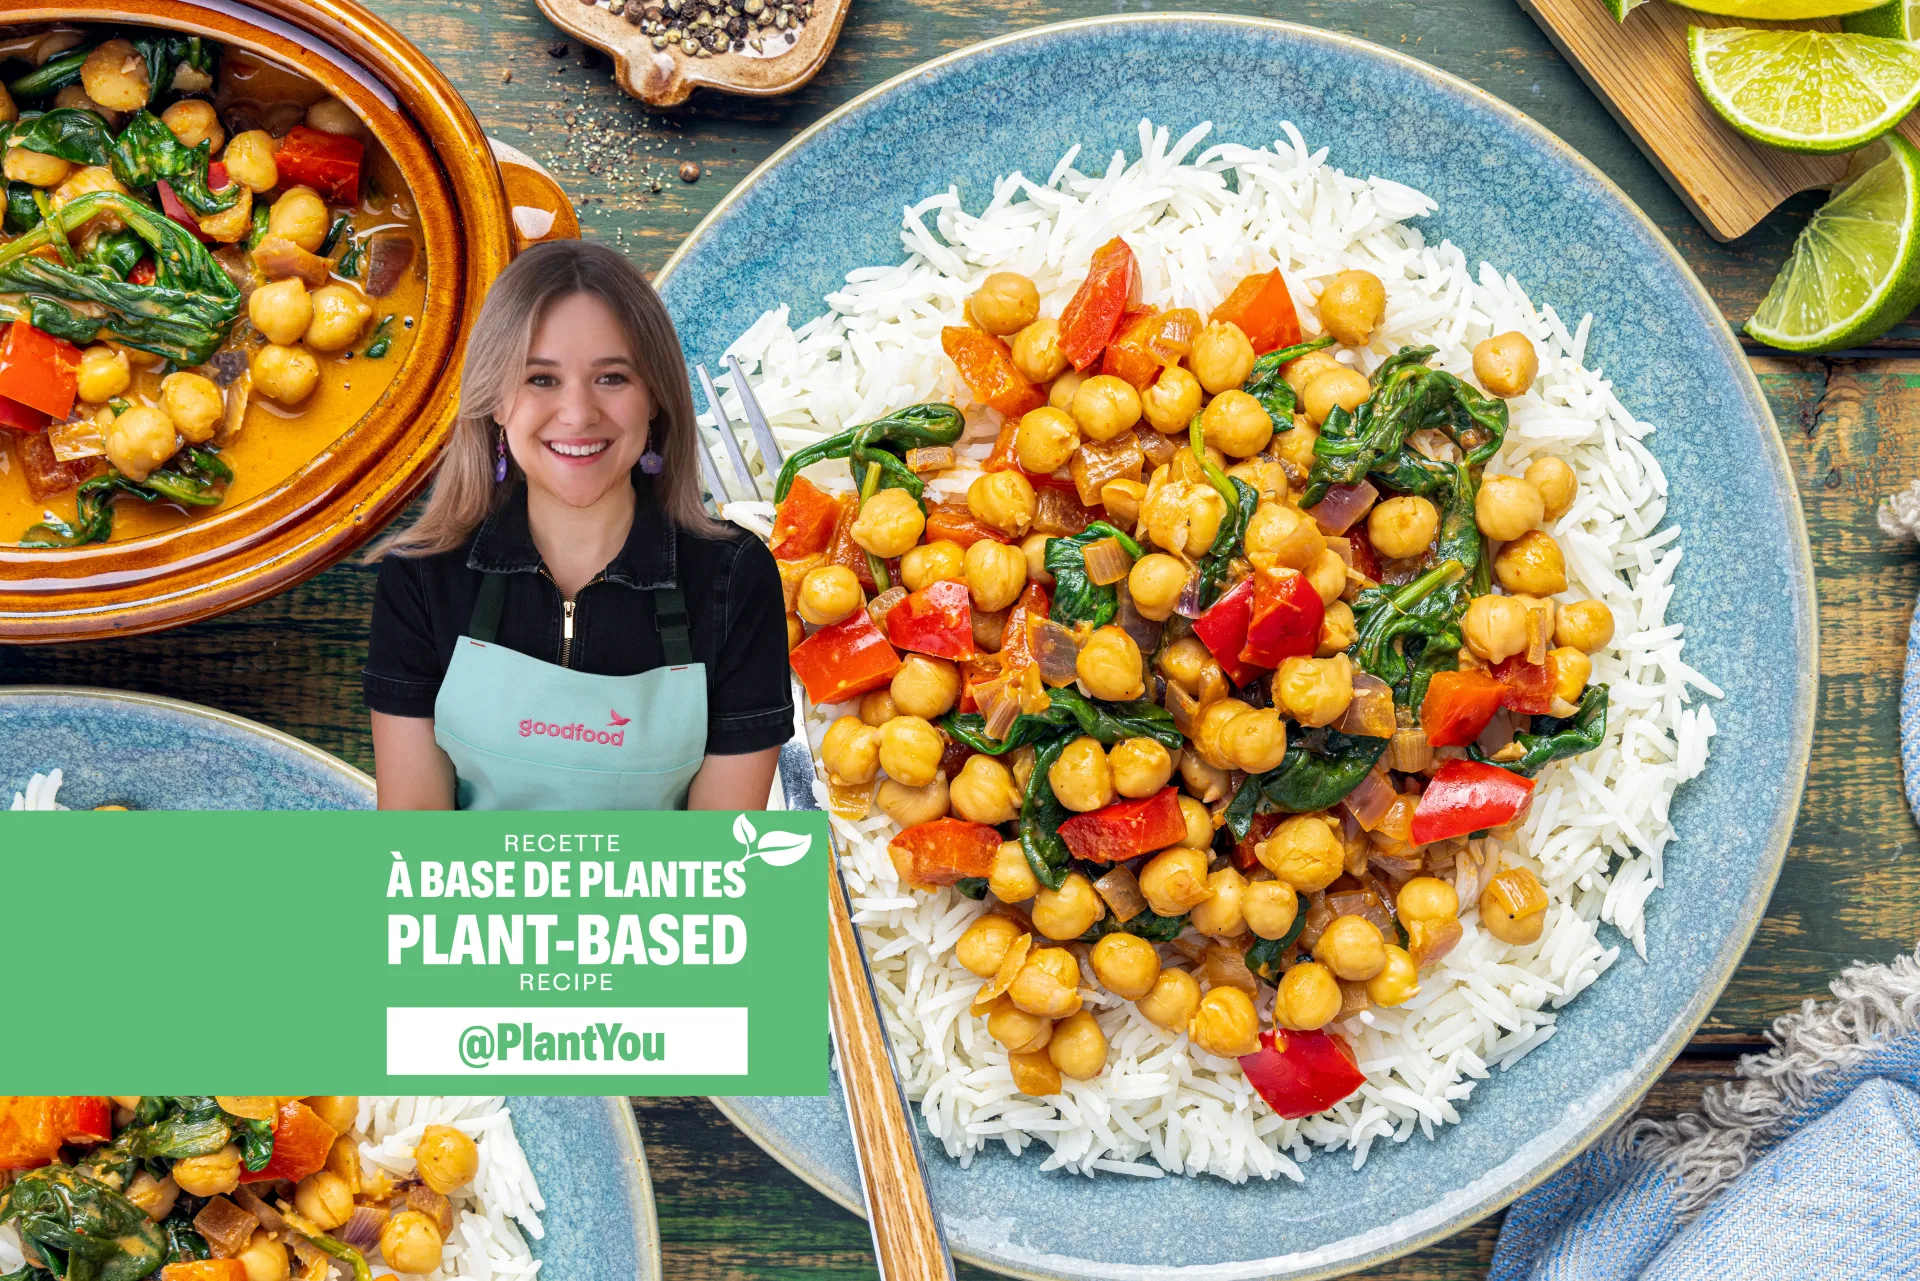 Goodfood x PlantYou Peanut Butter Chickpea Curry with Sweet Pepper & Leafy Greens BS CARLEIGH W488